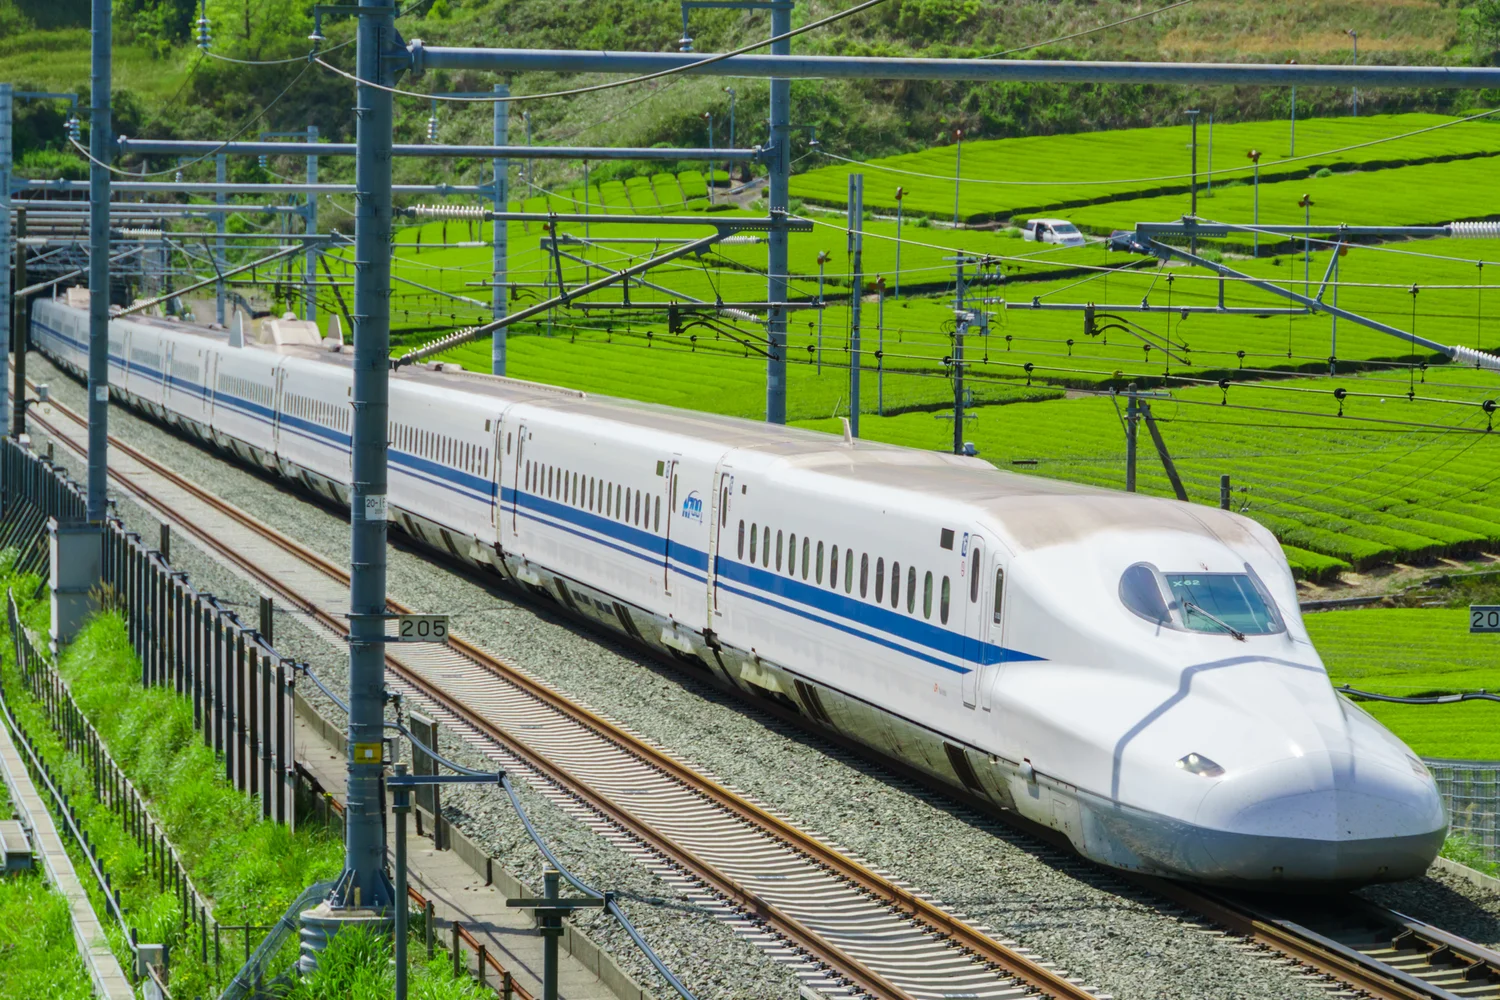 The photo is an image and may differ from the actual Shinkansen train running on the route of this product.